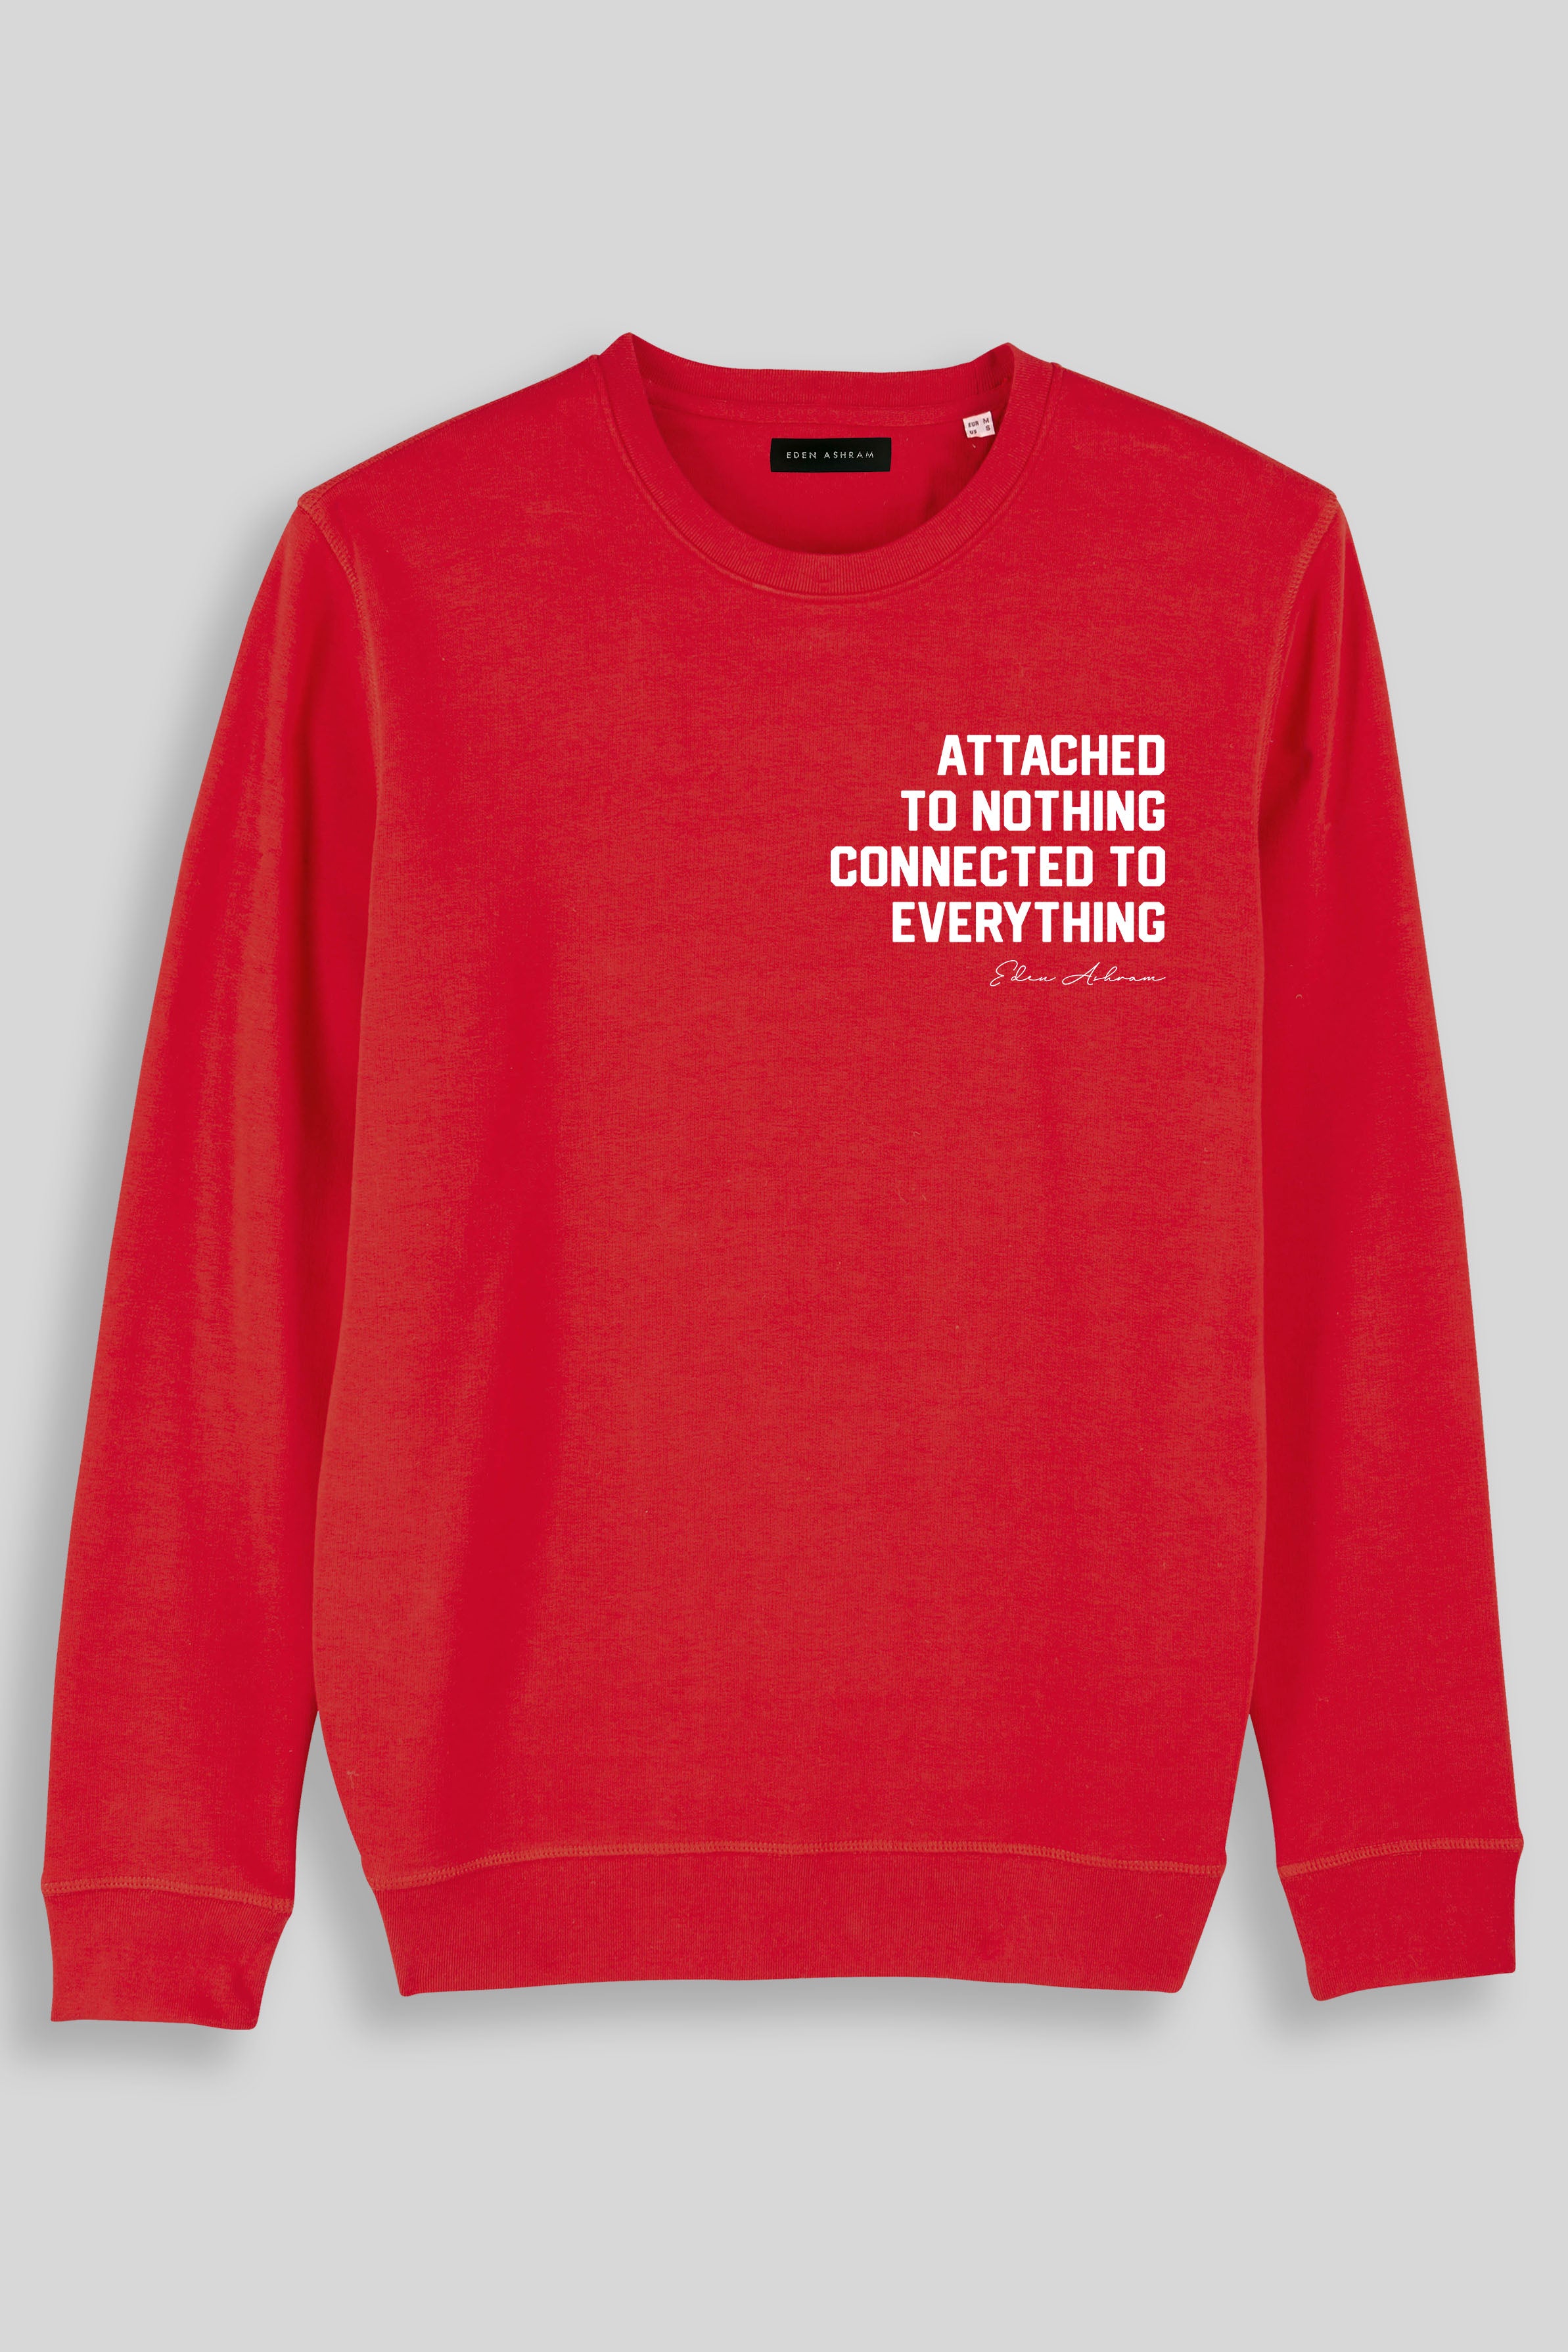 Eden Ashram Attached To Nothing Connected To Everything Premium Crew Neck Sweatshirt Red